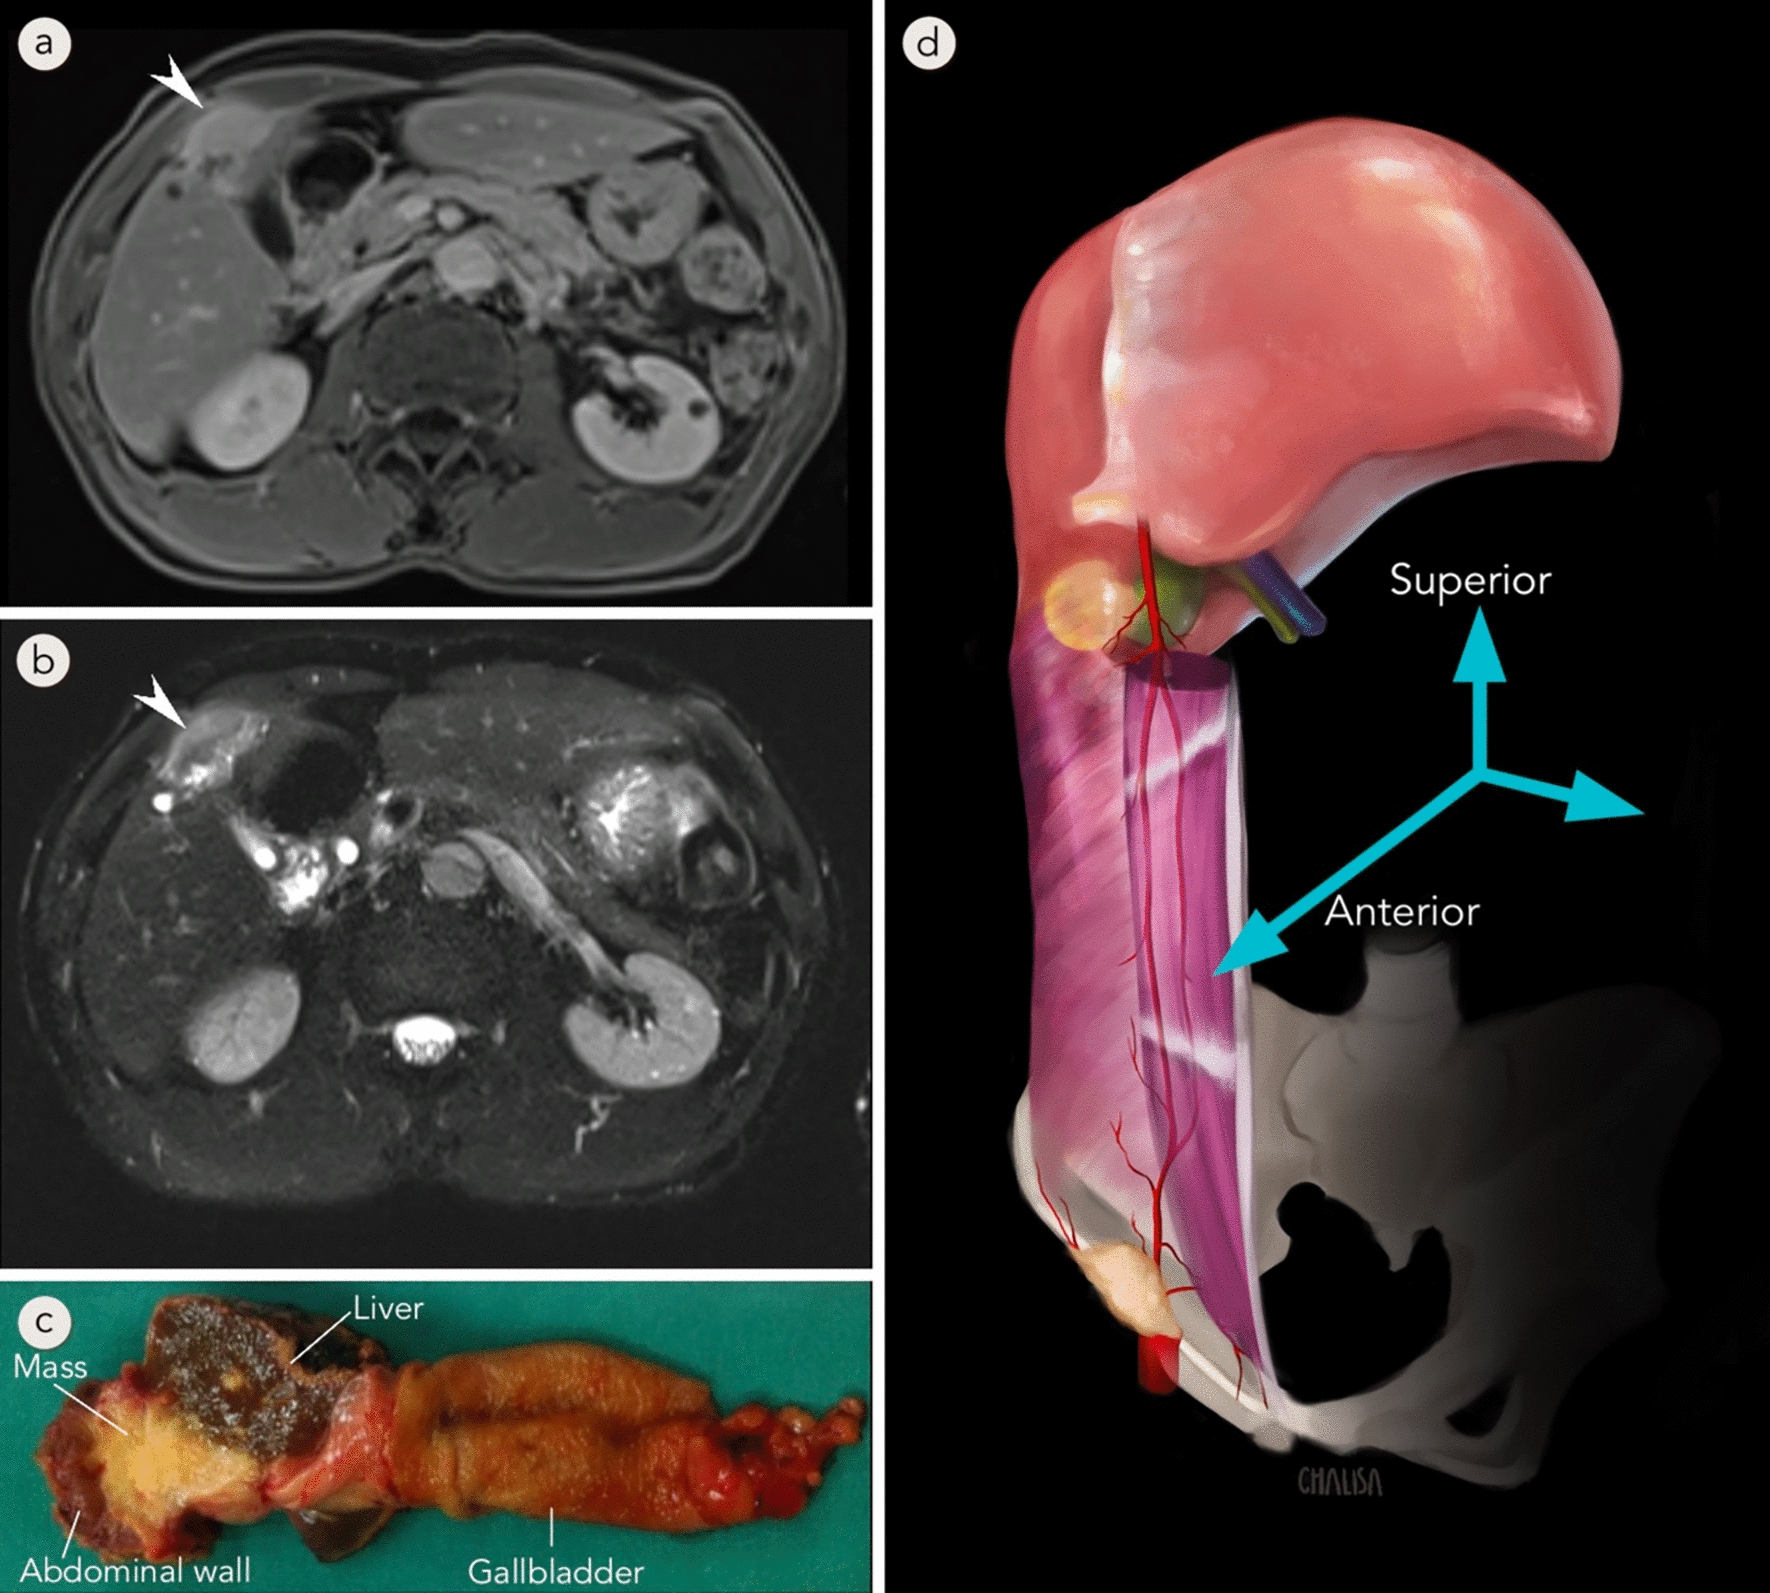 En bloc groin node resection reconstructed with external oblique flap for solitary metastatic cholangiocarcinoma: a case report